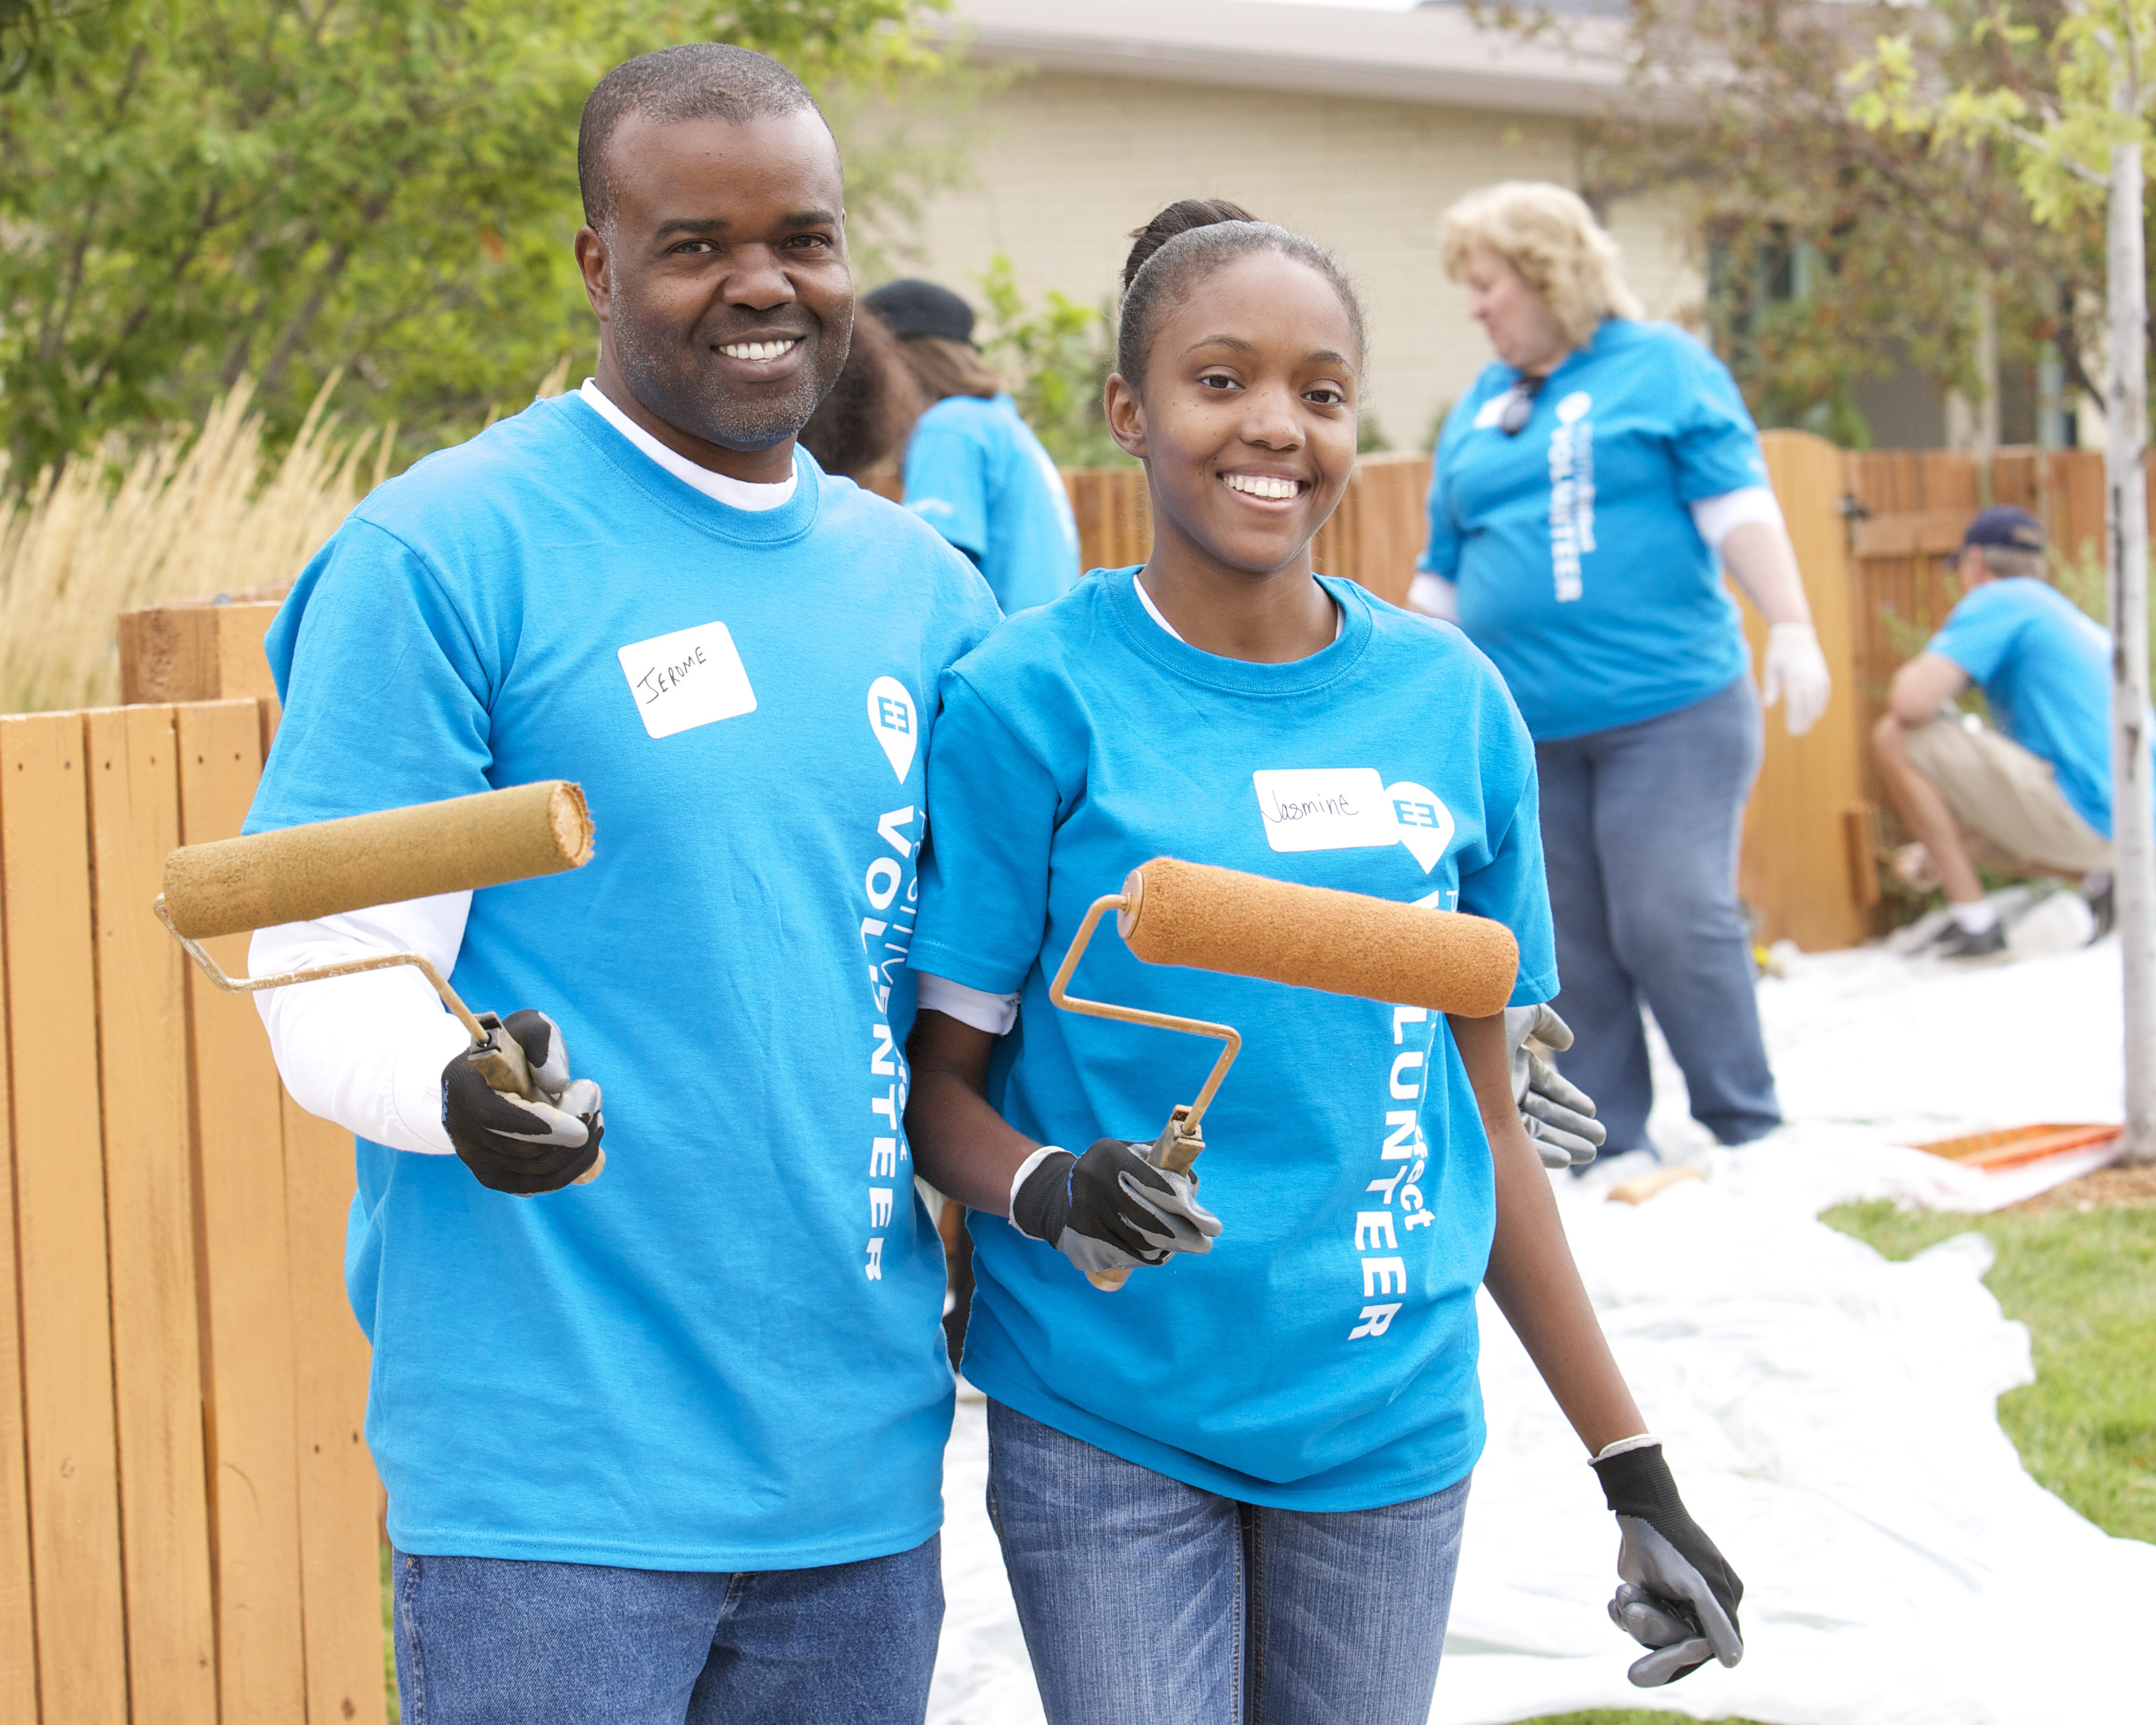 Jerome Davis, of Xcel Energy with a family member during Day of Service (credit: CBS)